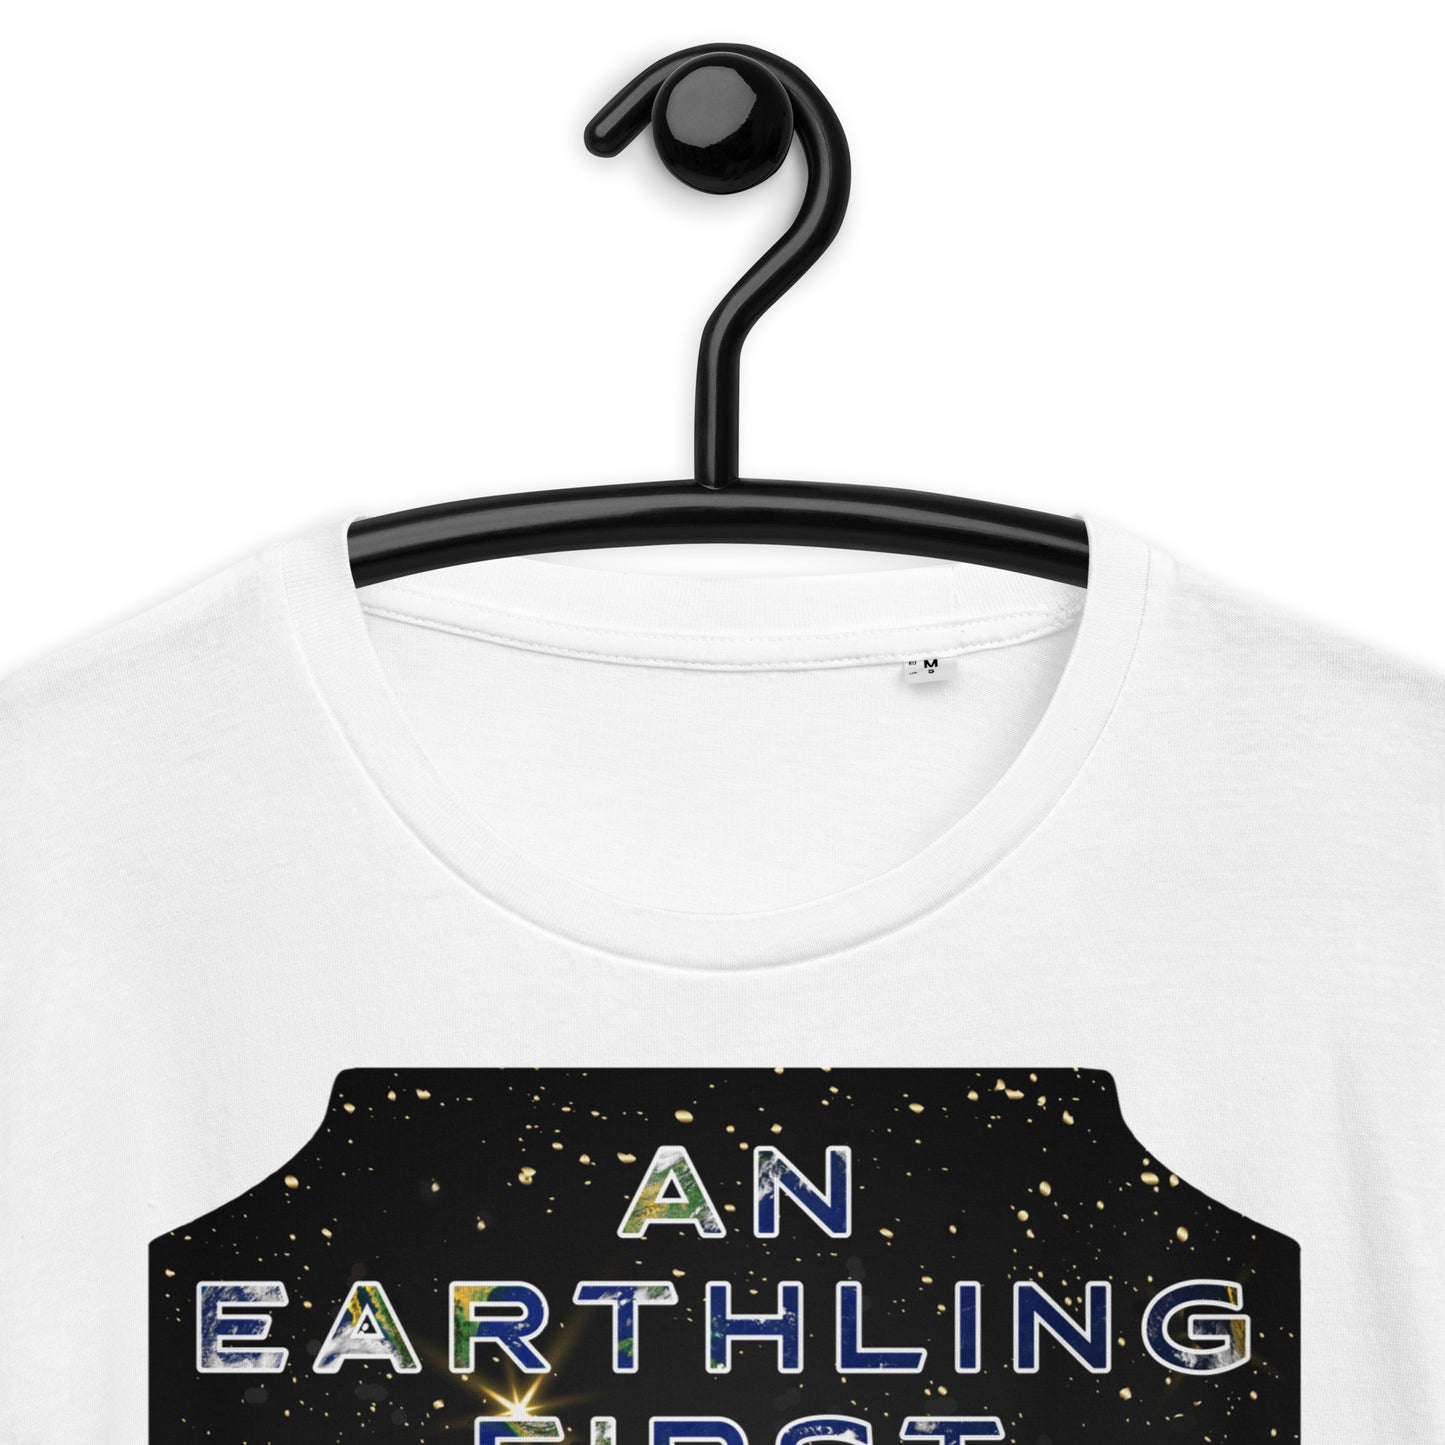 Unisex organic cotton t-shirt - An Earthling First. United all the us are Yoda says